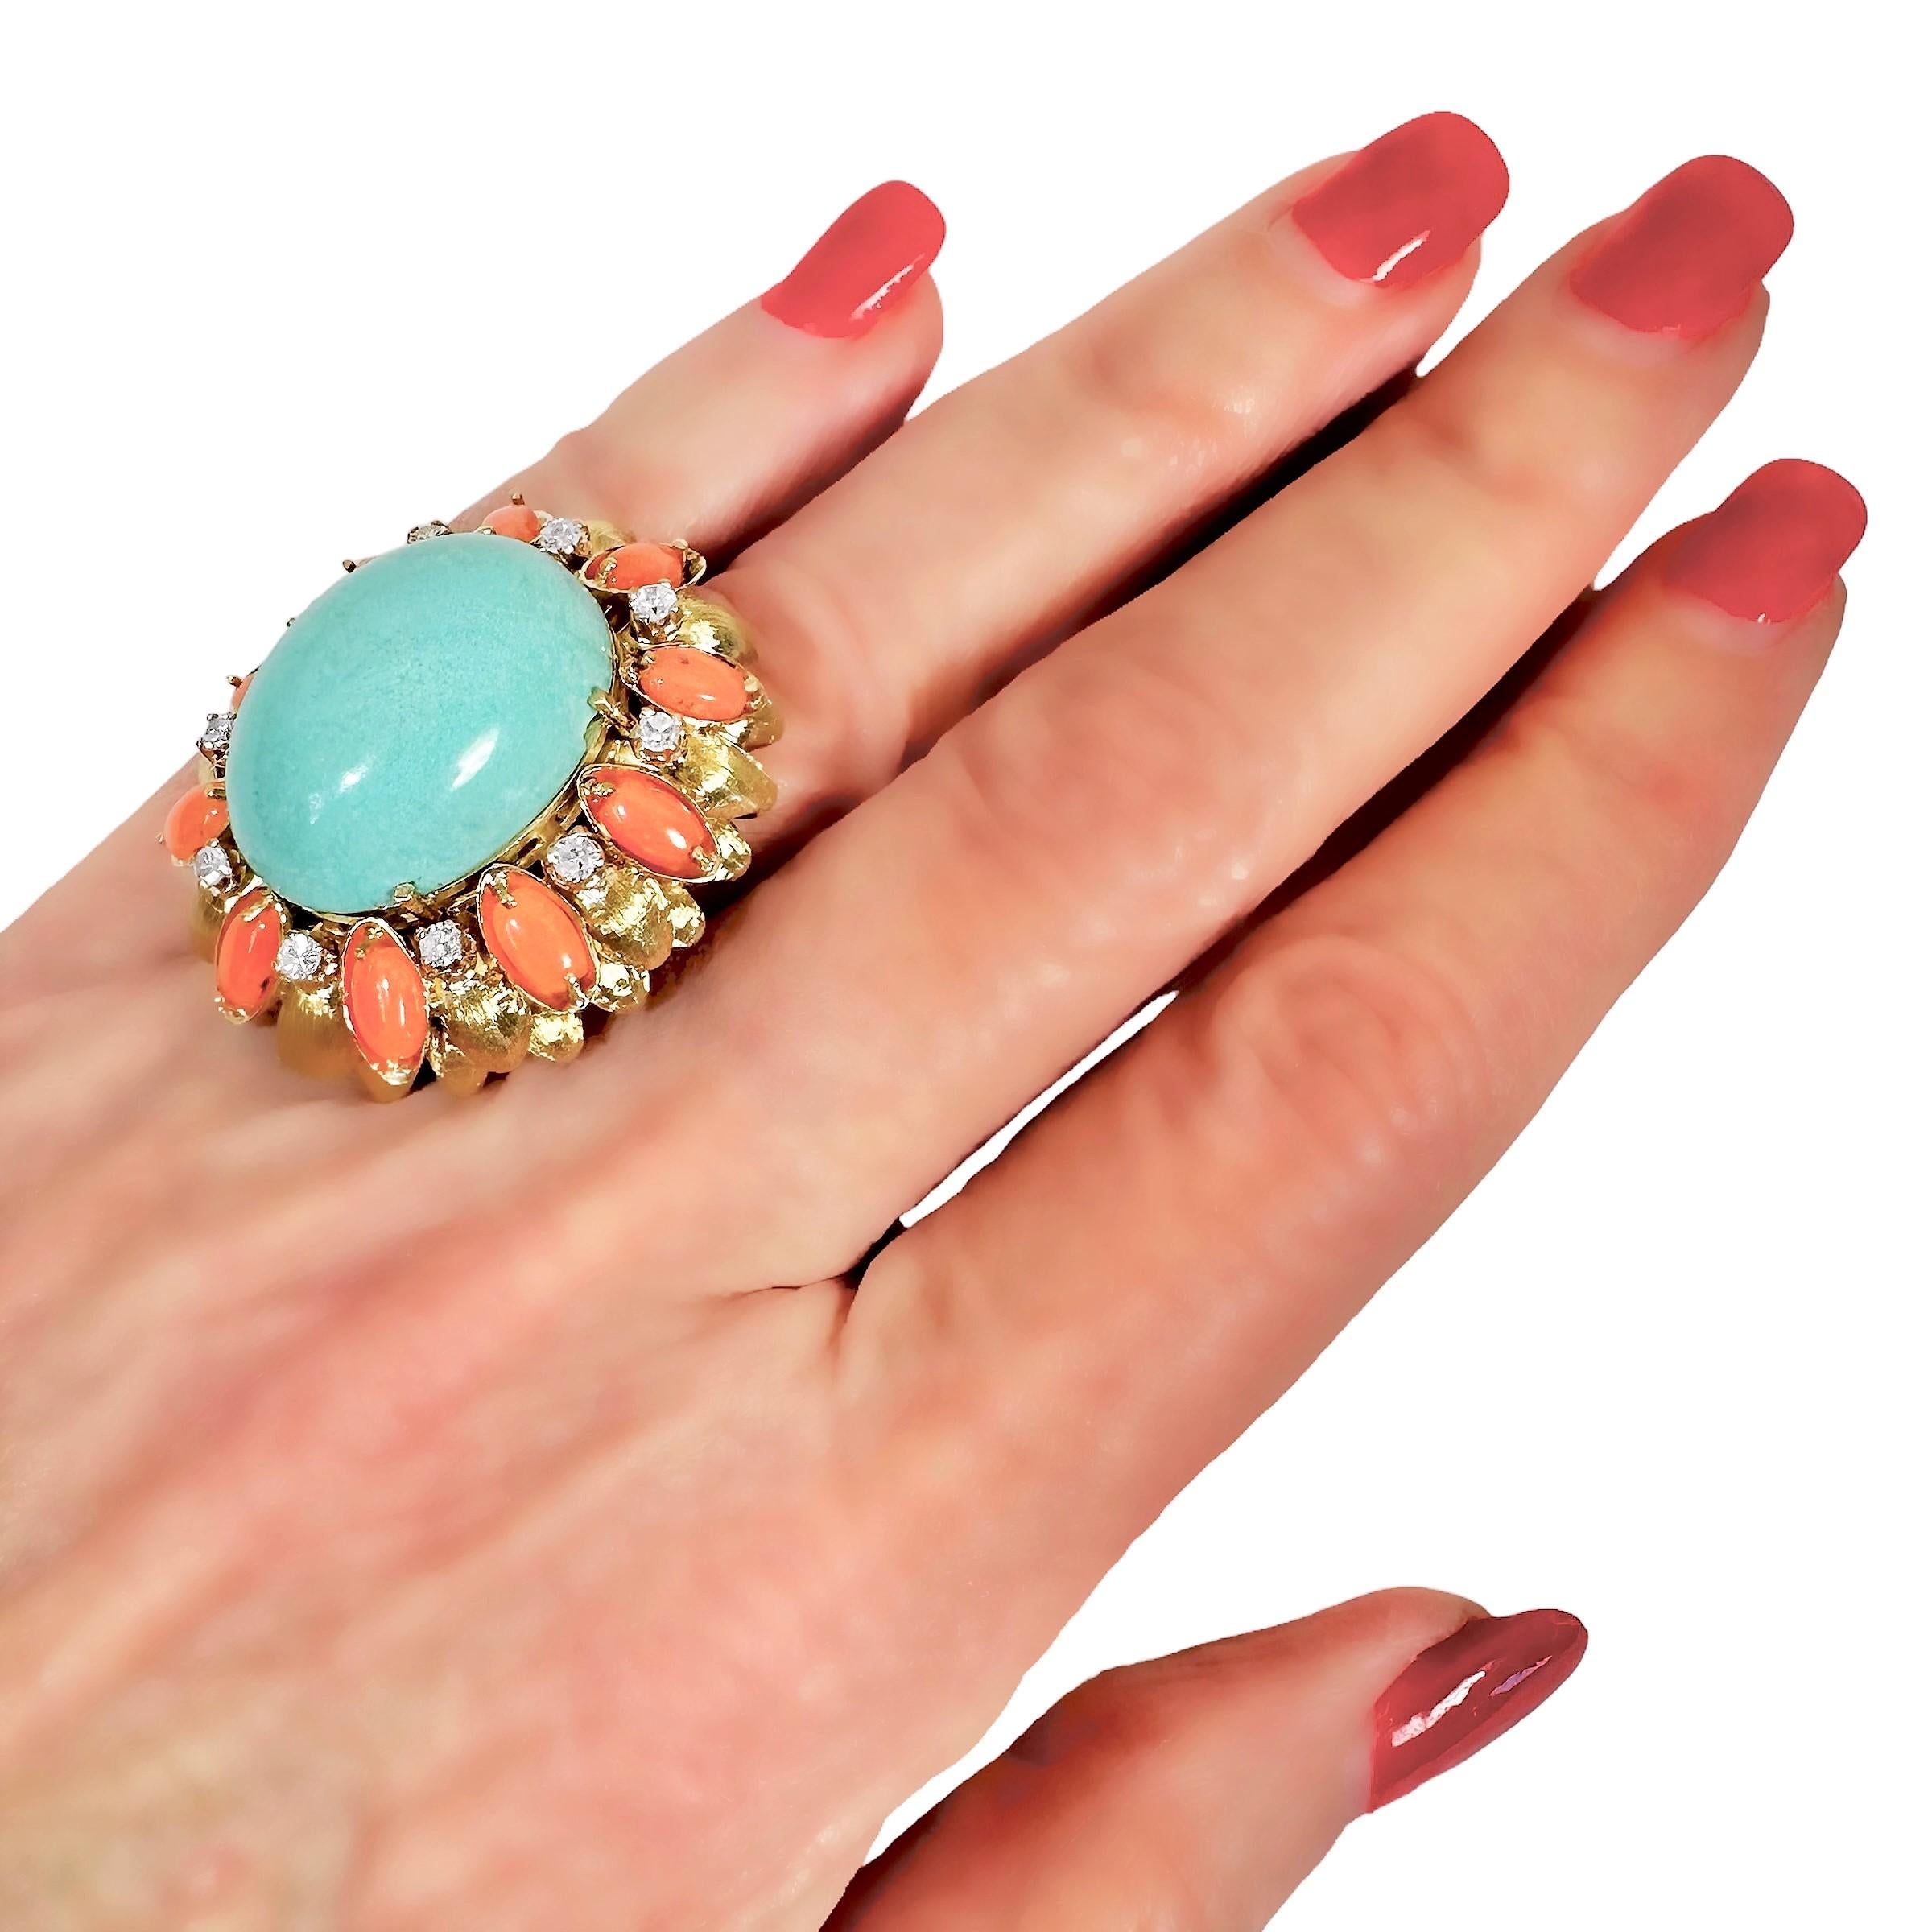 Large Scale Mid-20th Century 18K Yellow Gold, Coral, Turquoise and Diamond Ring For Sale 4